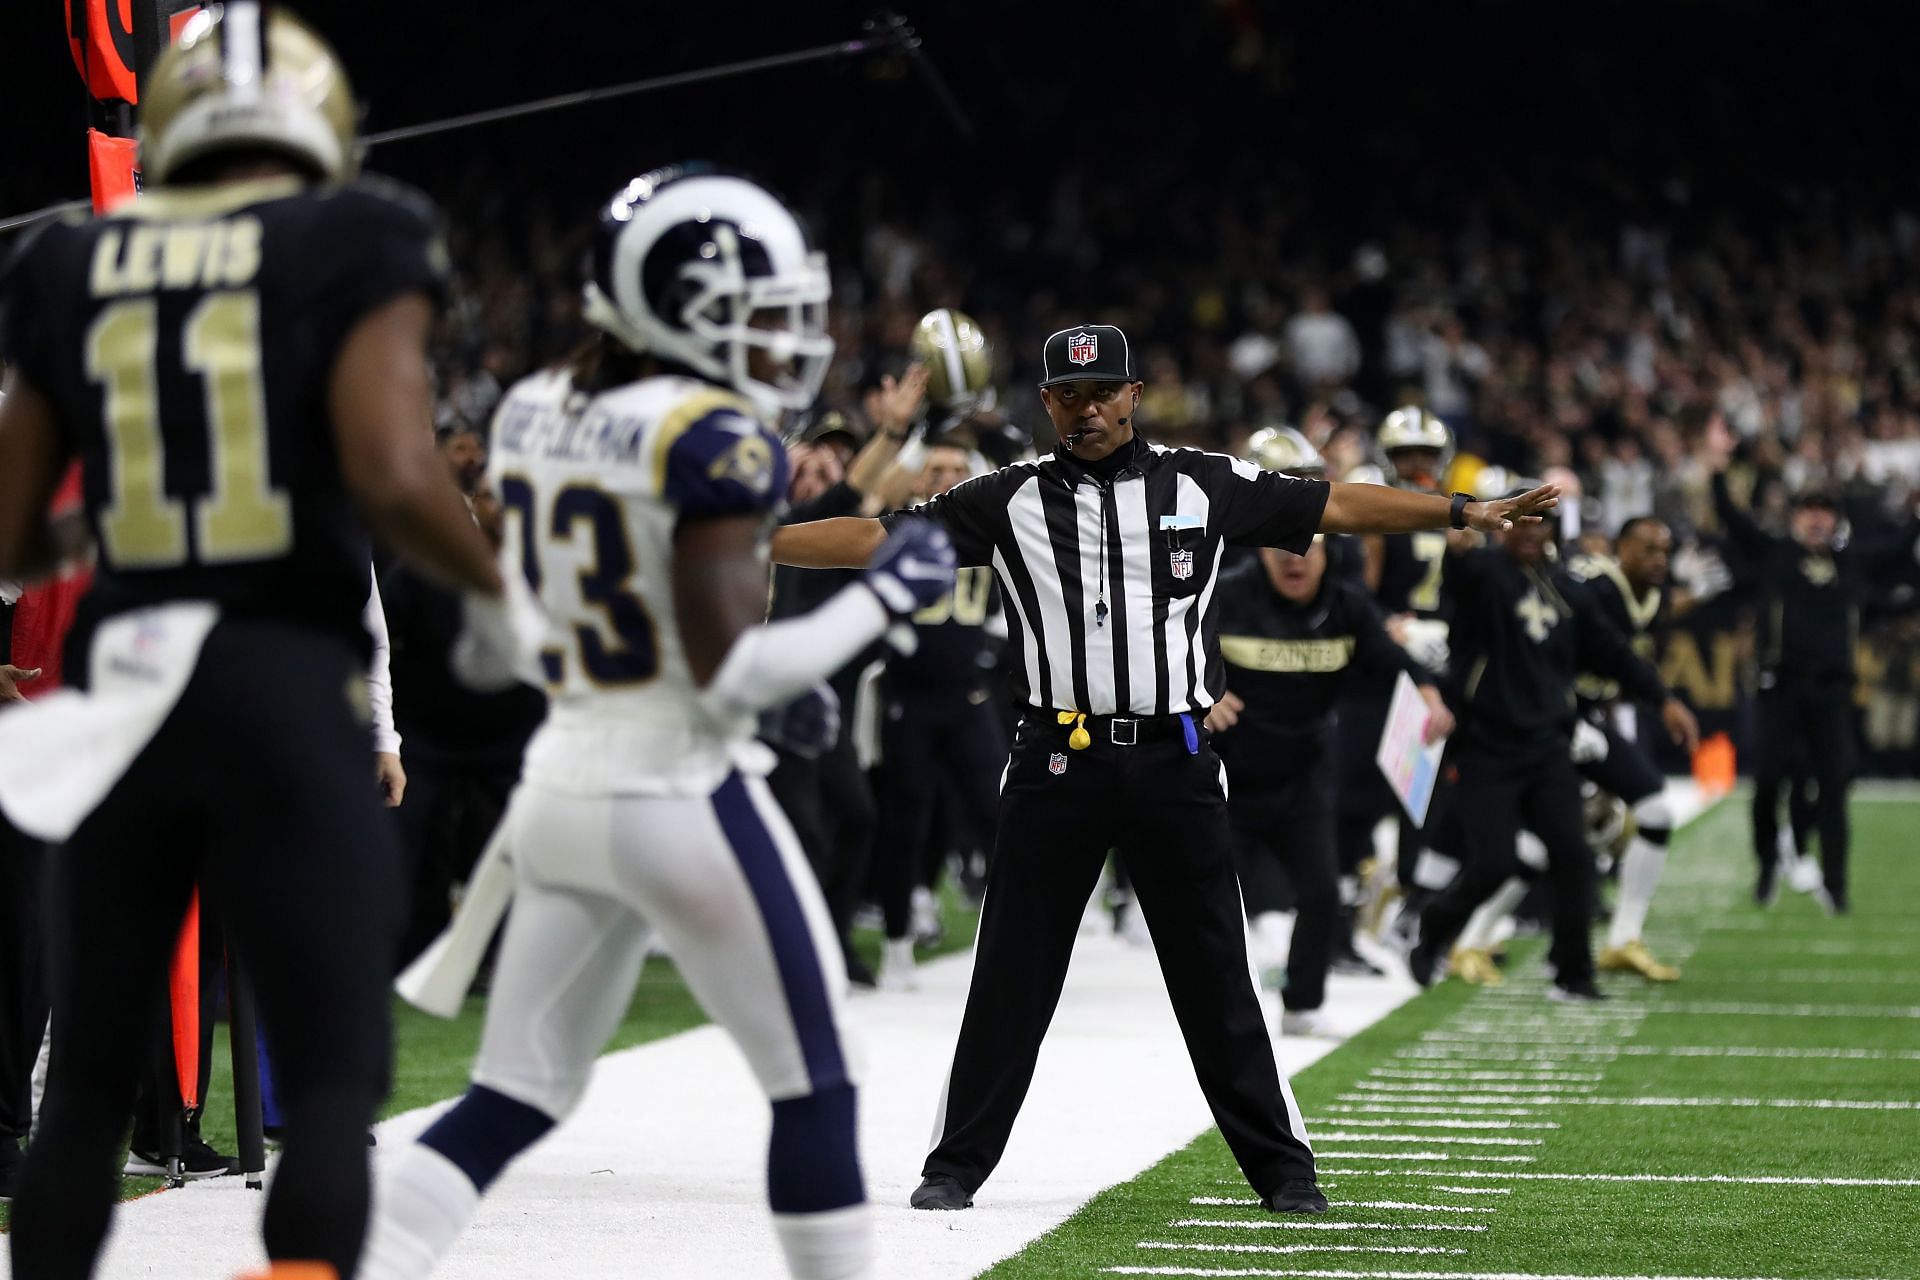 A controversial call marred the final stages of the 2019 NFC Championship Game (Photo: Getty)